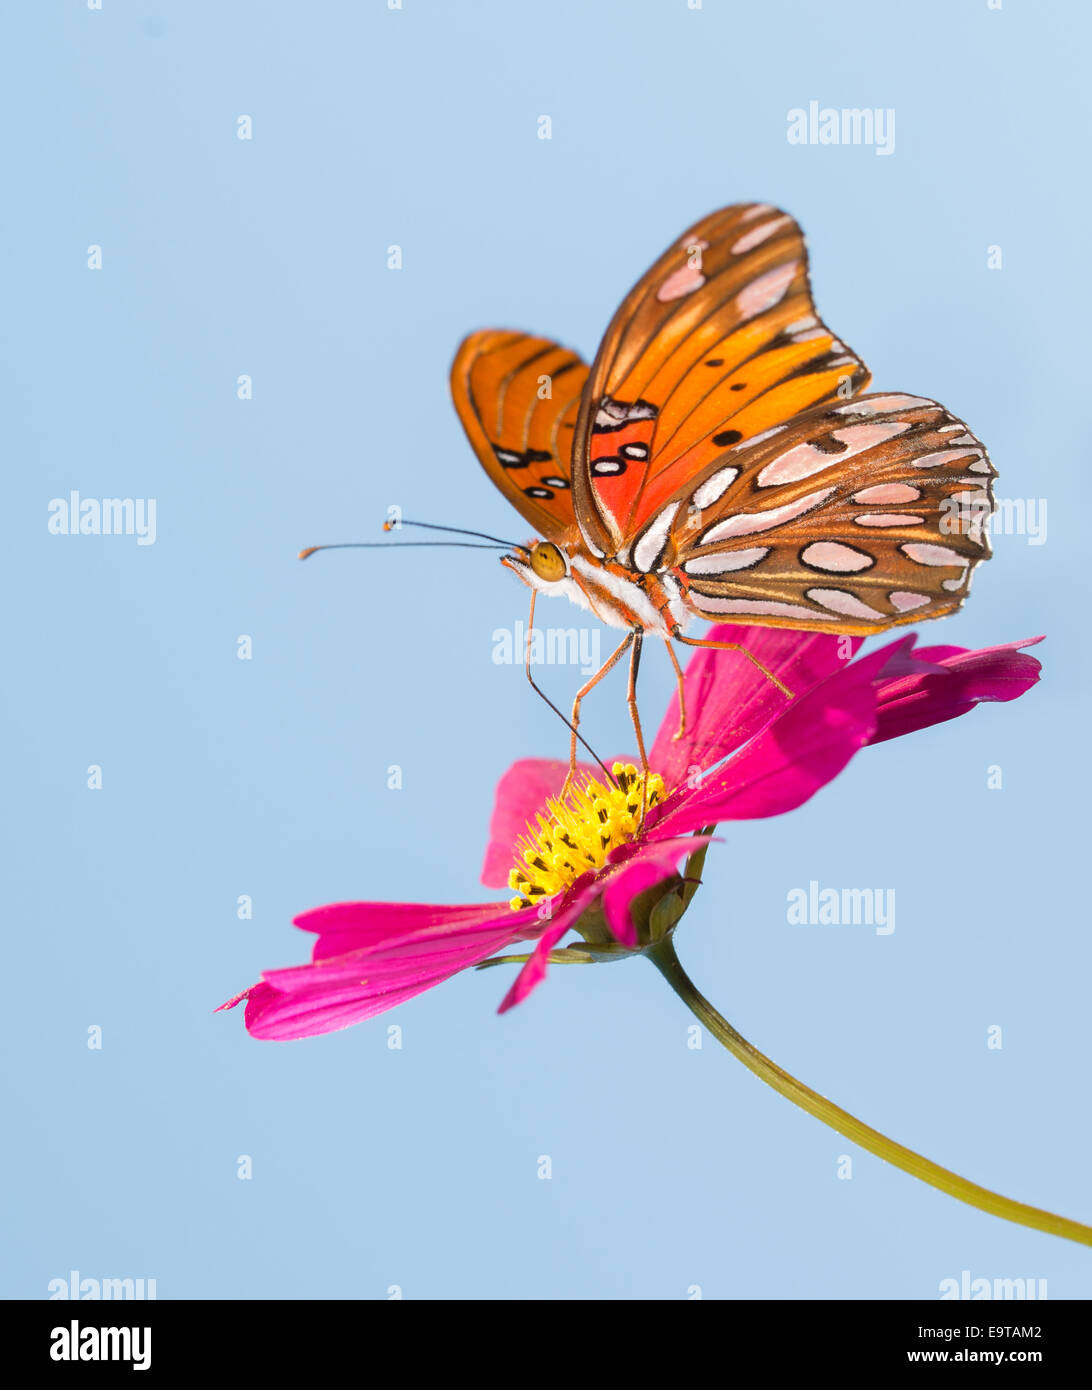 Gulf Fritillary butterfly feeding on a pink Cosmos flower with blue sky background Stock Photo